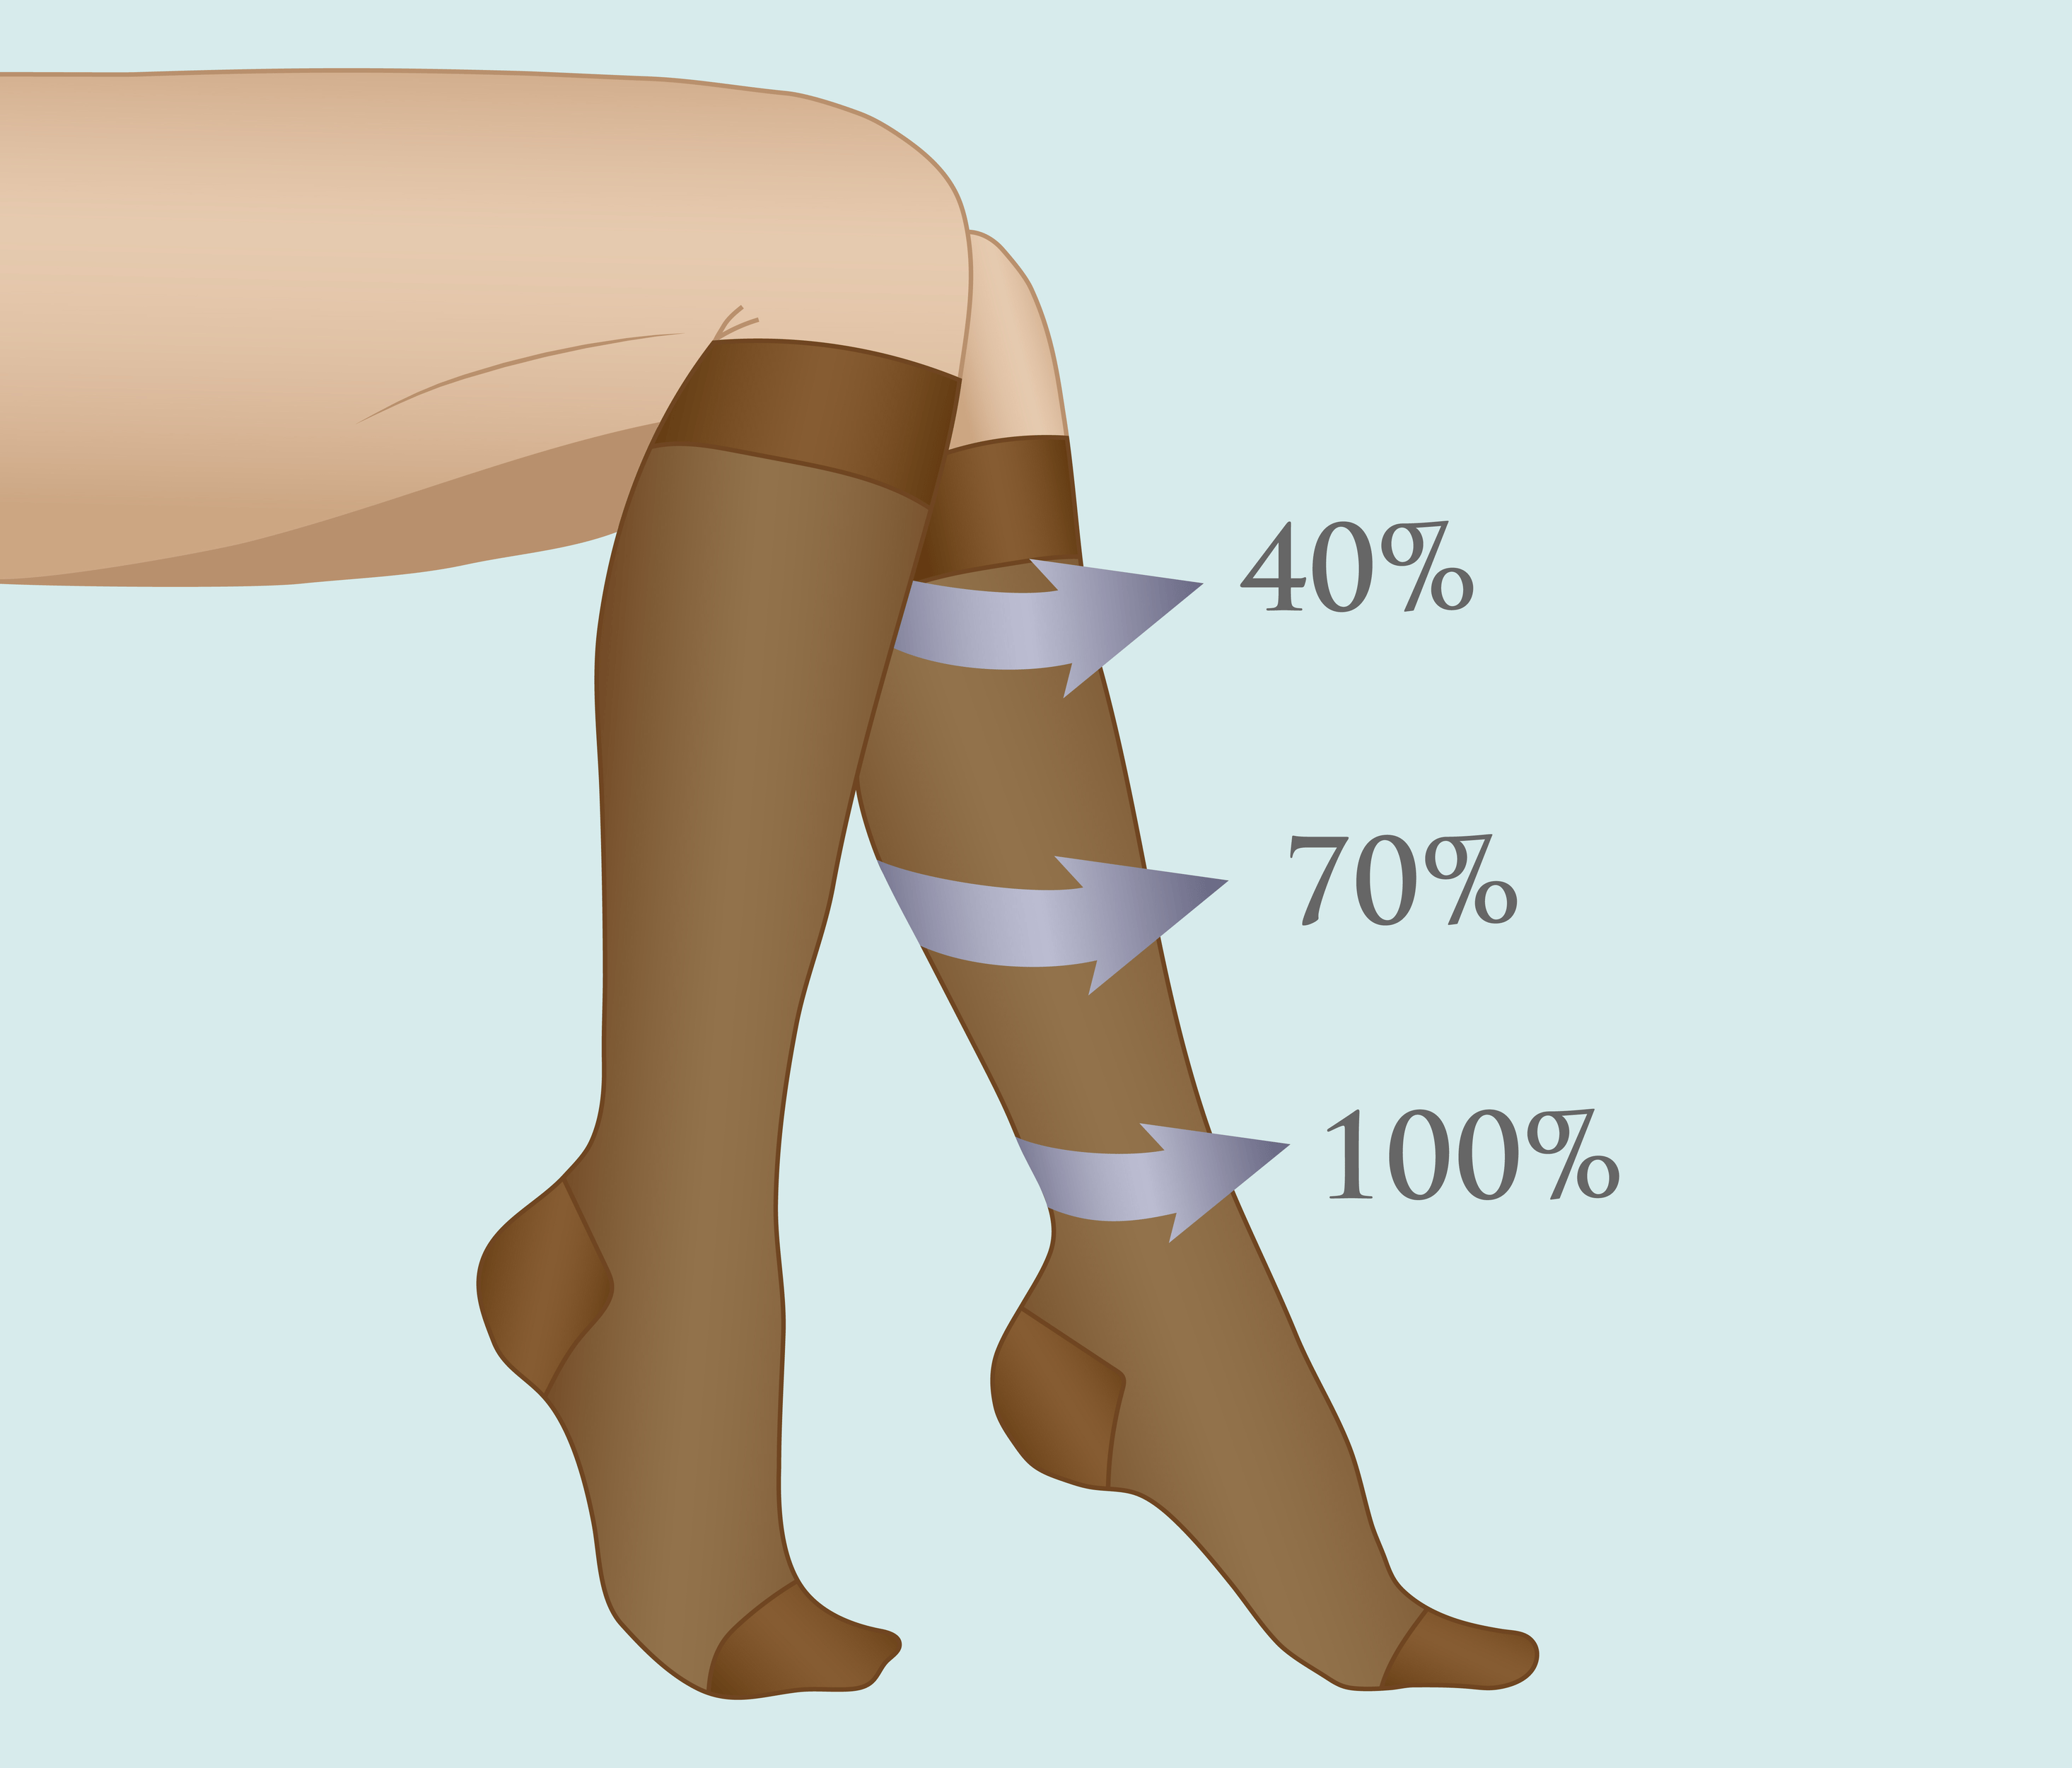 Heel Guide Compression Stocking Aid :: helpful dressing aid for compression  stockings